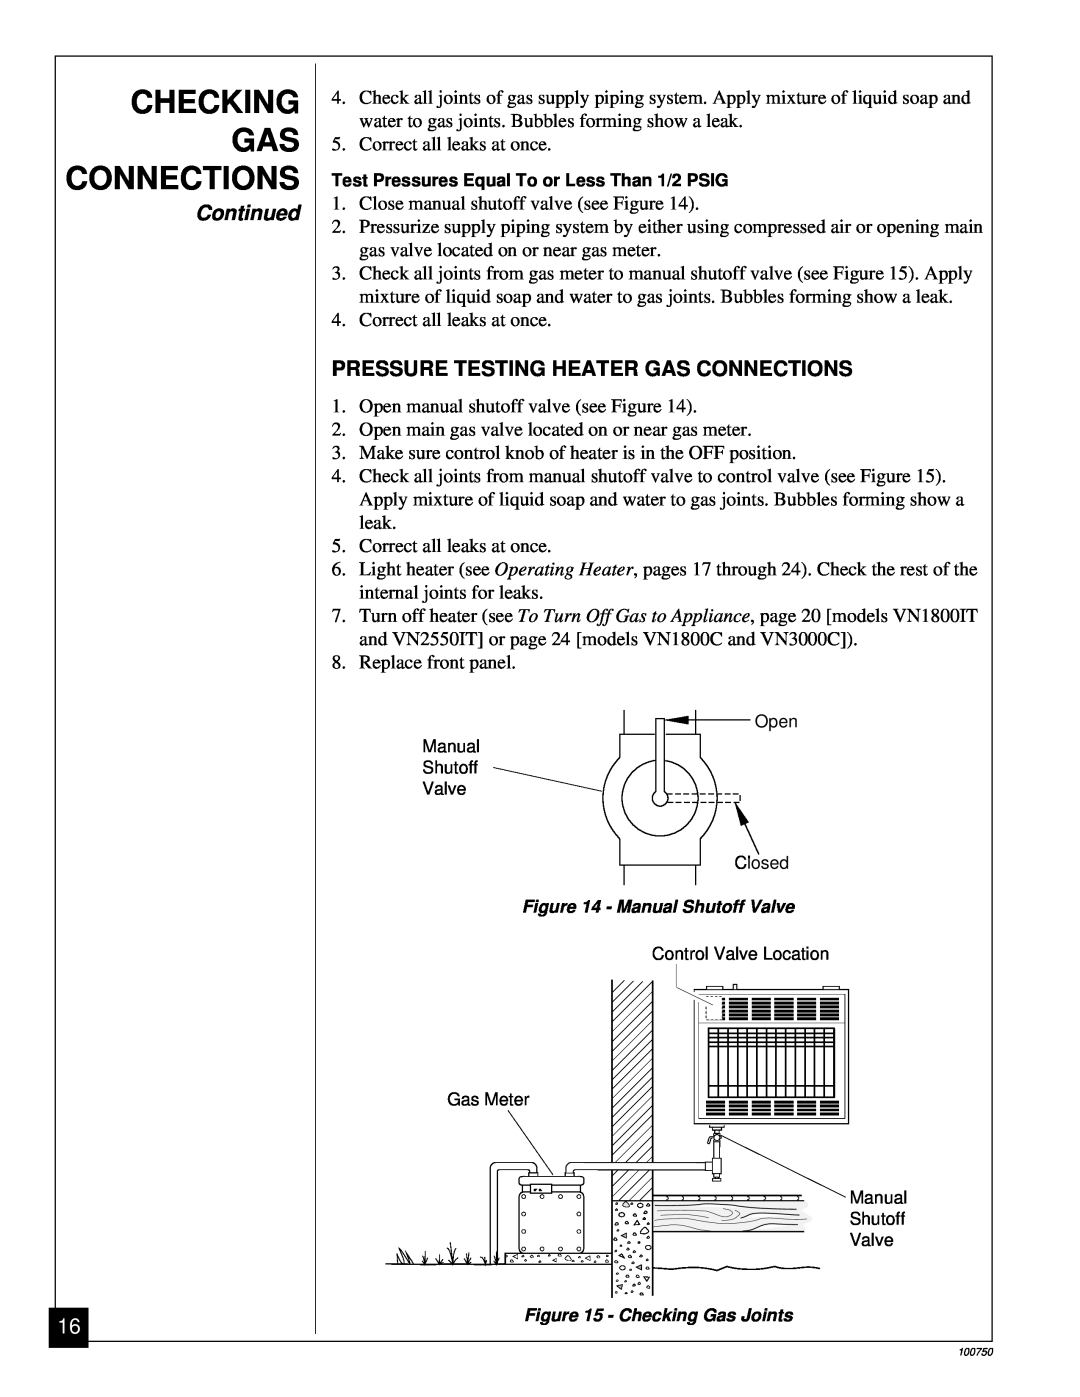 Desa VN1800IT, VN1800C, VN2550IT, VN3000C Checking Gas Connections, Continued, Pressure Testing Heater Gas Connections 